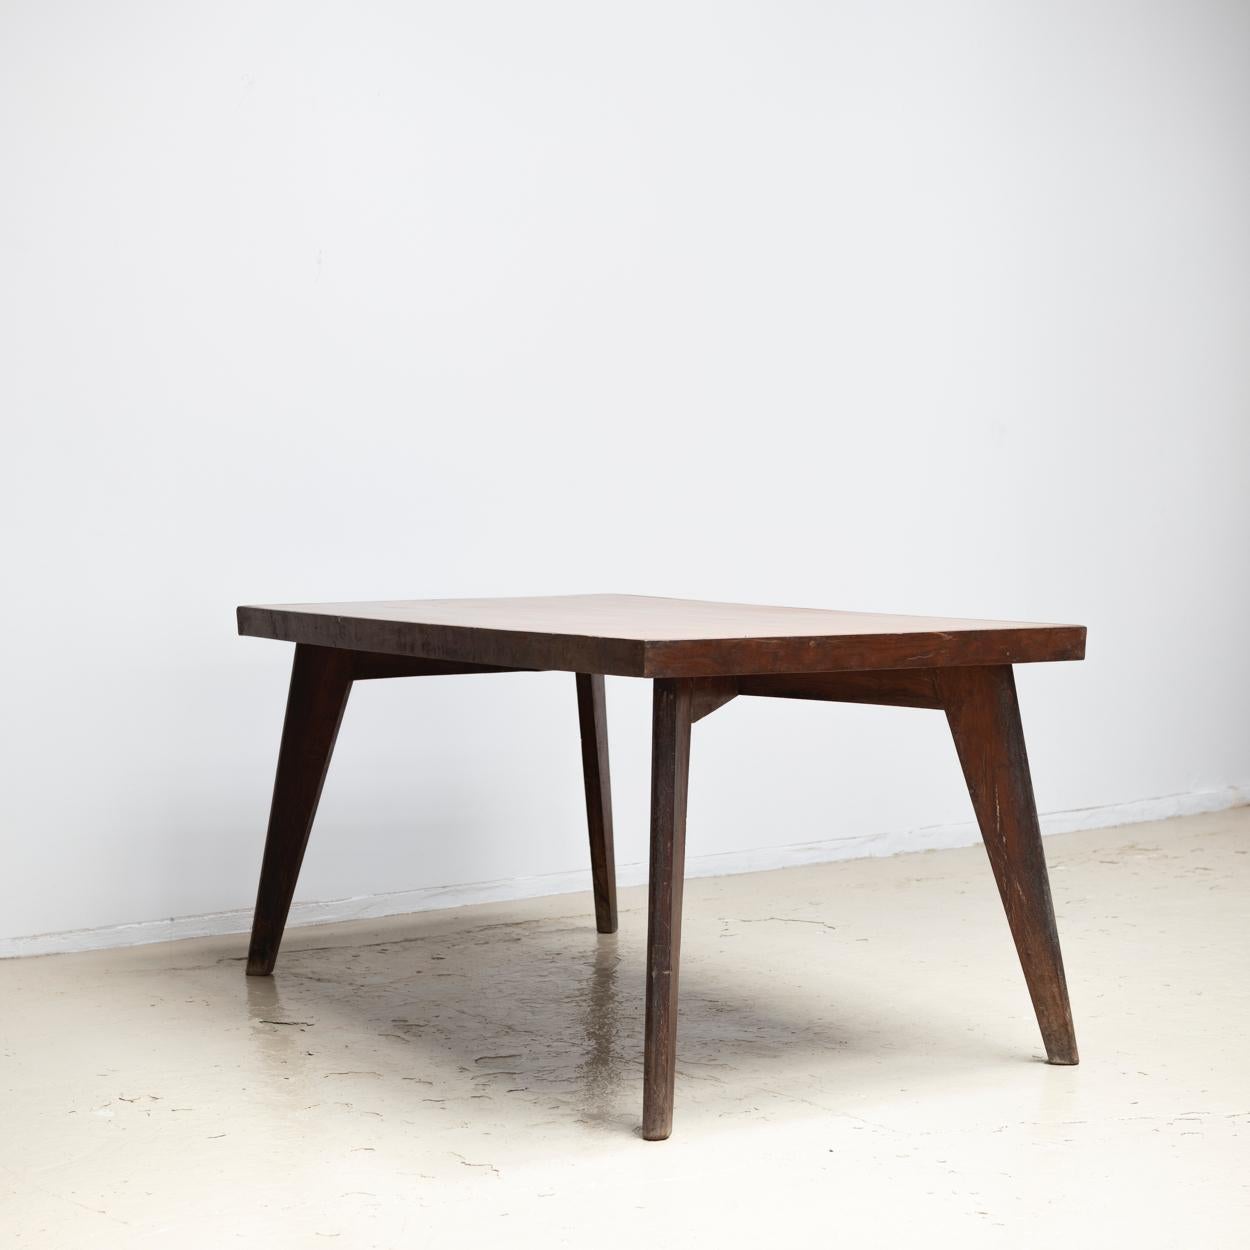 Indian Pierre Jeanneret Dining Table, Chandigarh, Circa 1960s